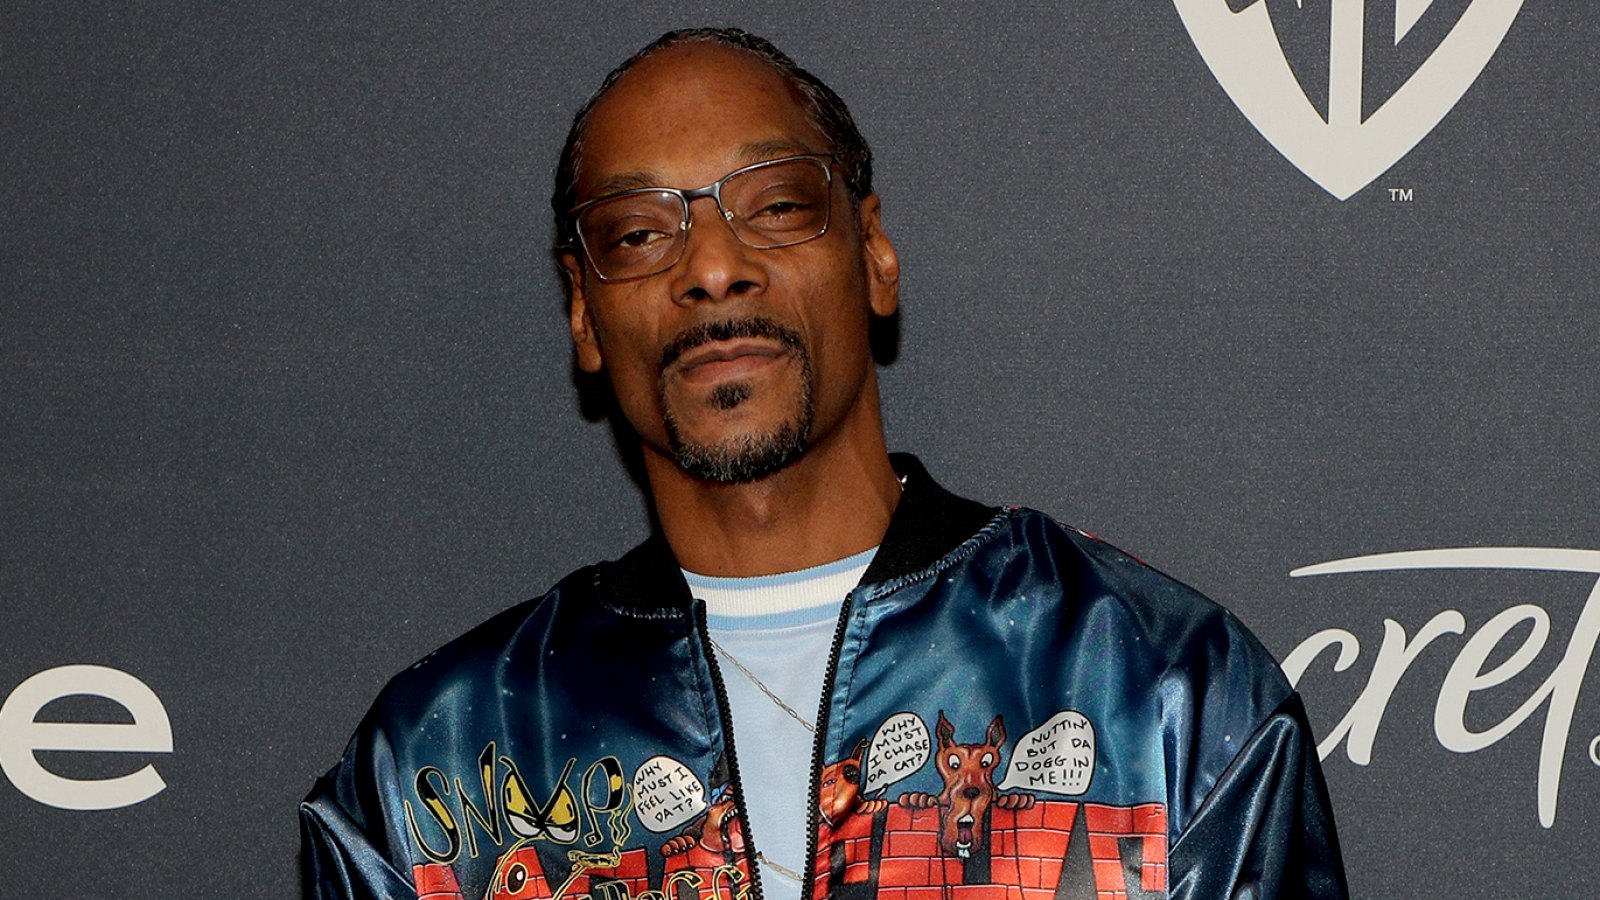 Snoop Dogg Releases His Own Gin 25 Years After Gin and Juice Debut 2